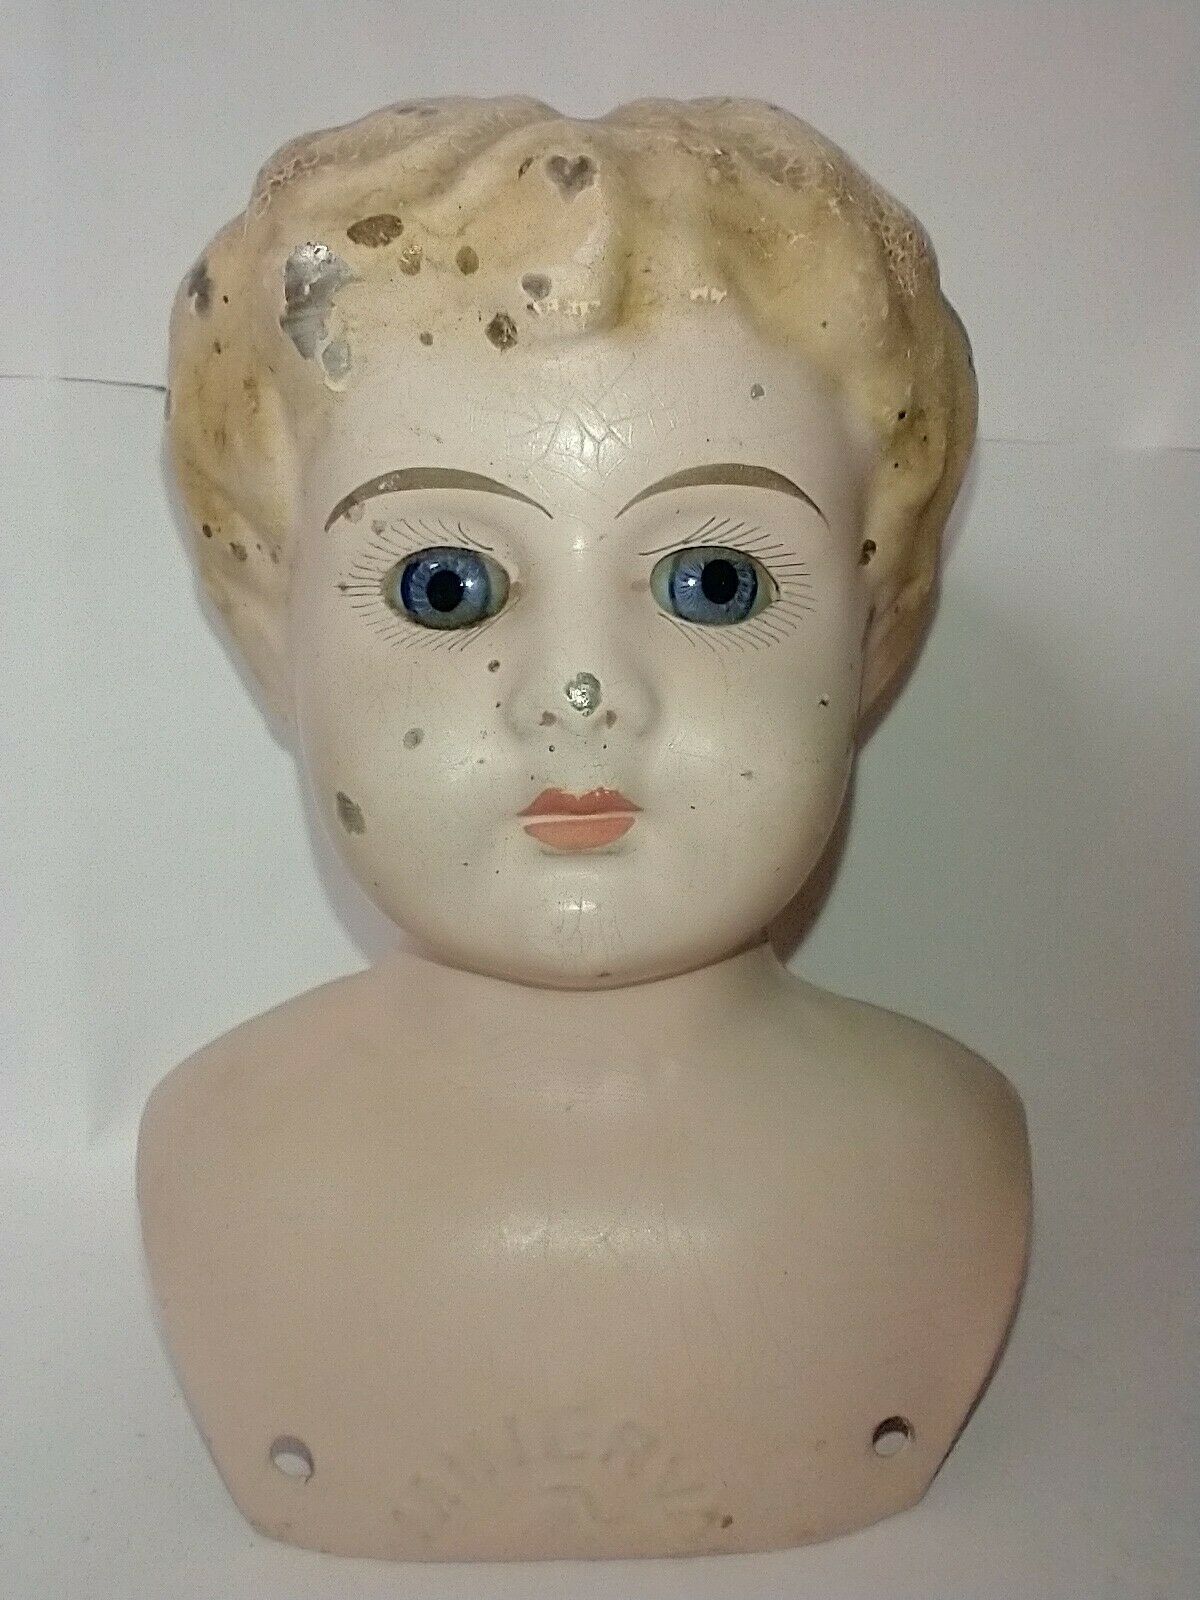 Antique Tin Metal Doll Head Germany Minerva Number 3 Vintage Doll Bust 4” Tall